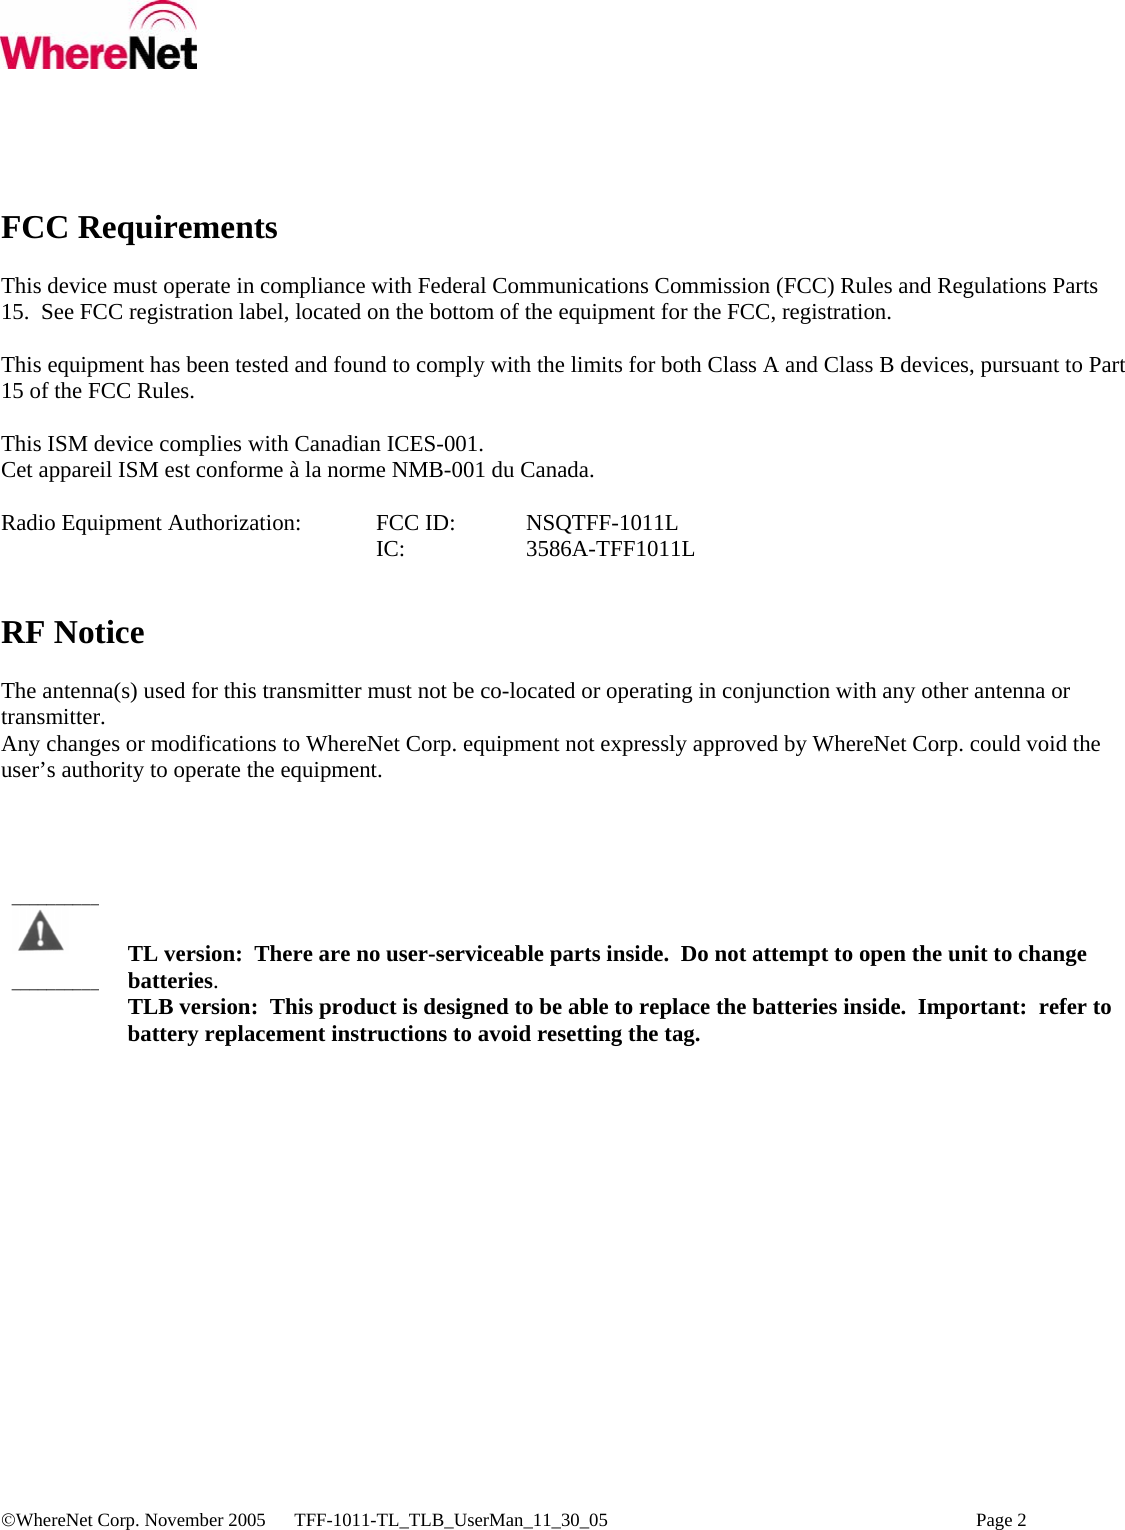  ©WhereNet Corp. November 2005  TFF-1011-TL_TLB_UserMan_11_30_05    Page 2  FCC Requirements  This device must operate in compliance with Federal Communications Commission (FCC) Rules and Regulations Parts 15.  See FCC registration label, located on the bottom of the equipment for the FCC, registration.  This equipment has been tested and found to comply with the limits for both Class A and Class B devices, pursuant to Part 15 of the FCC Rules.  This ISM device complies with Canadian ICES-001. Cet appareil ISM est conforme à la norme NMB-001 du Canada.  Radio Equipment Authorization:  FCC ID:   NSQTFF-1011L      IC:   3586A-TFF1011L   RF Notice  The antenna(s) used for this transmitter must not be co-located or operating in conjunction with any other antenna or transmitter. Any changes or modifications to WhereNet Corp. equipment not expressly approved by WhereNet Corp. could void the user’s authority to operate the equipment.       TL version:  There are no user-serviceable parts inside.  Do not attempt to open the unit to change batteries. TLB version:  This product is designed to be able to replace the batteries inside.  Important:  refer to            battery replacement instructions to avoid resetting the tag. ____________________